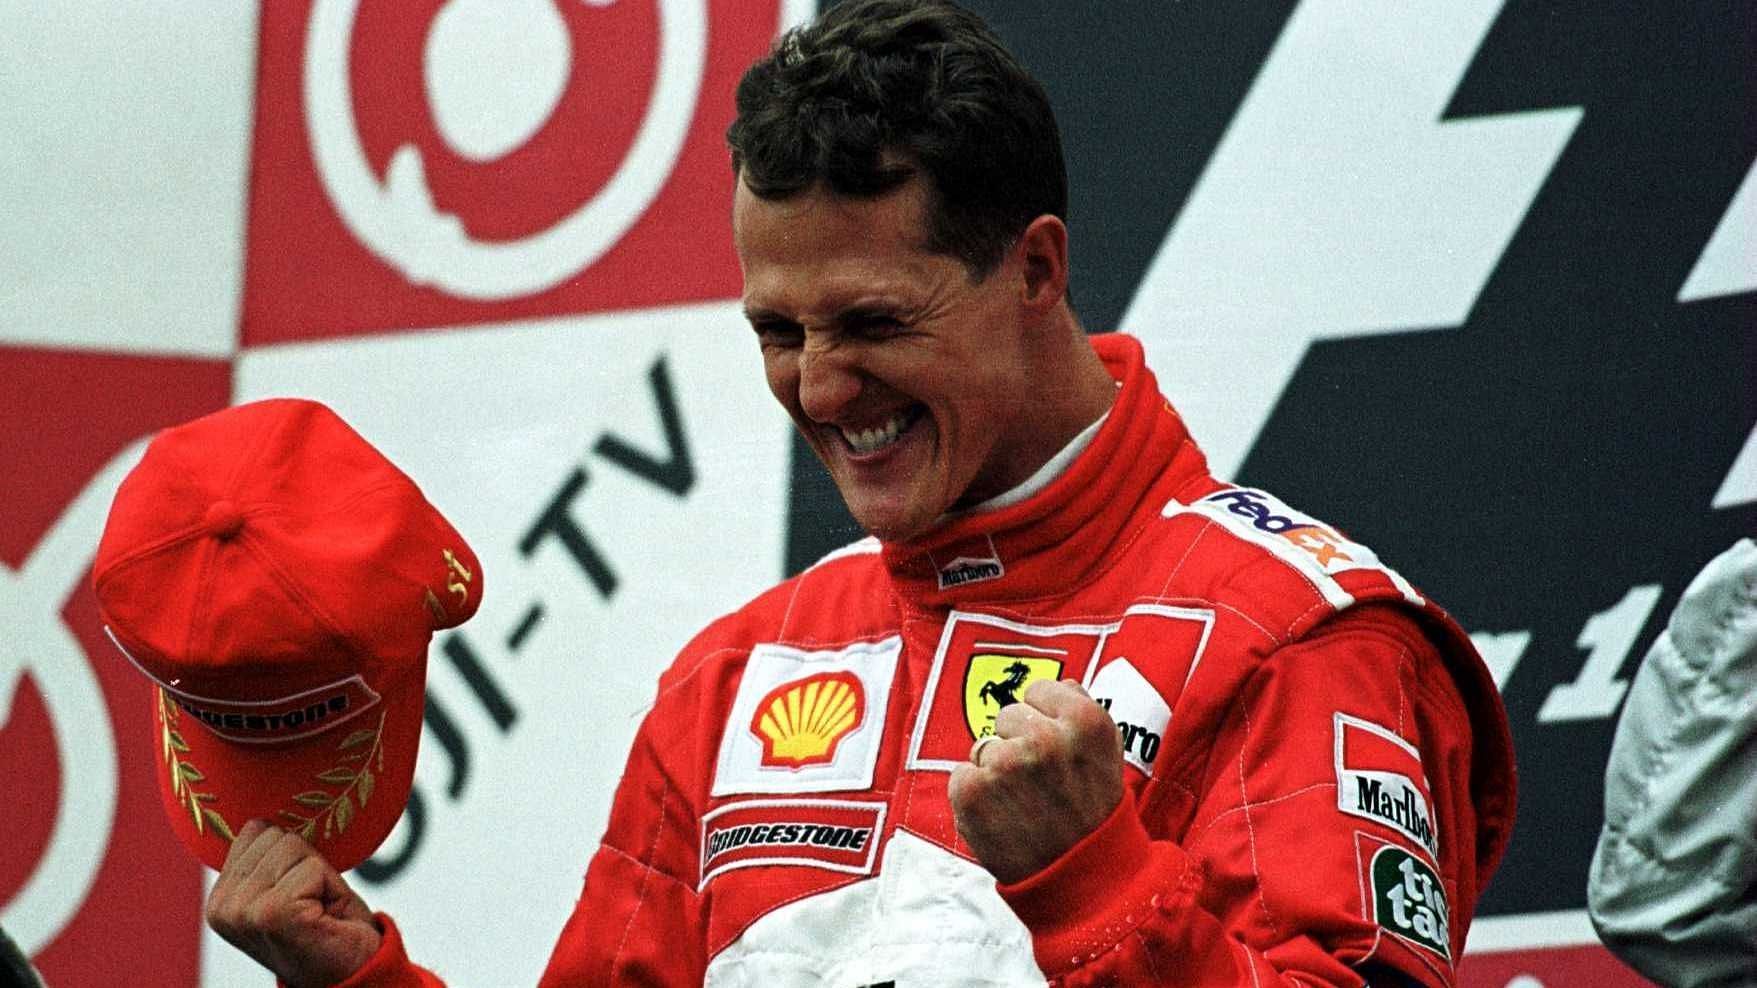 Michael Schumacher celebrates on the podium (Image by @Big_Data_Master from X)